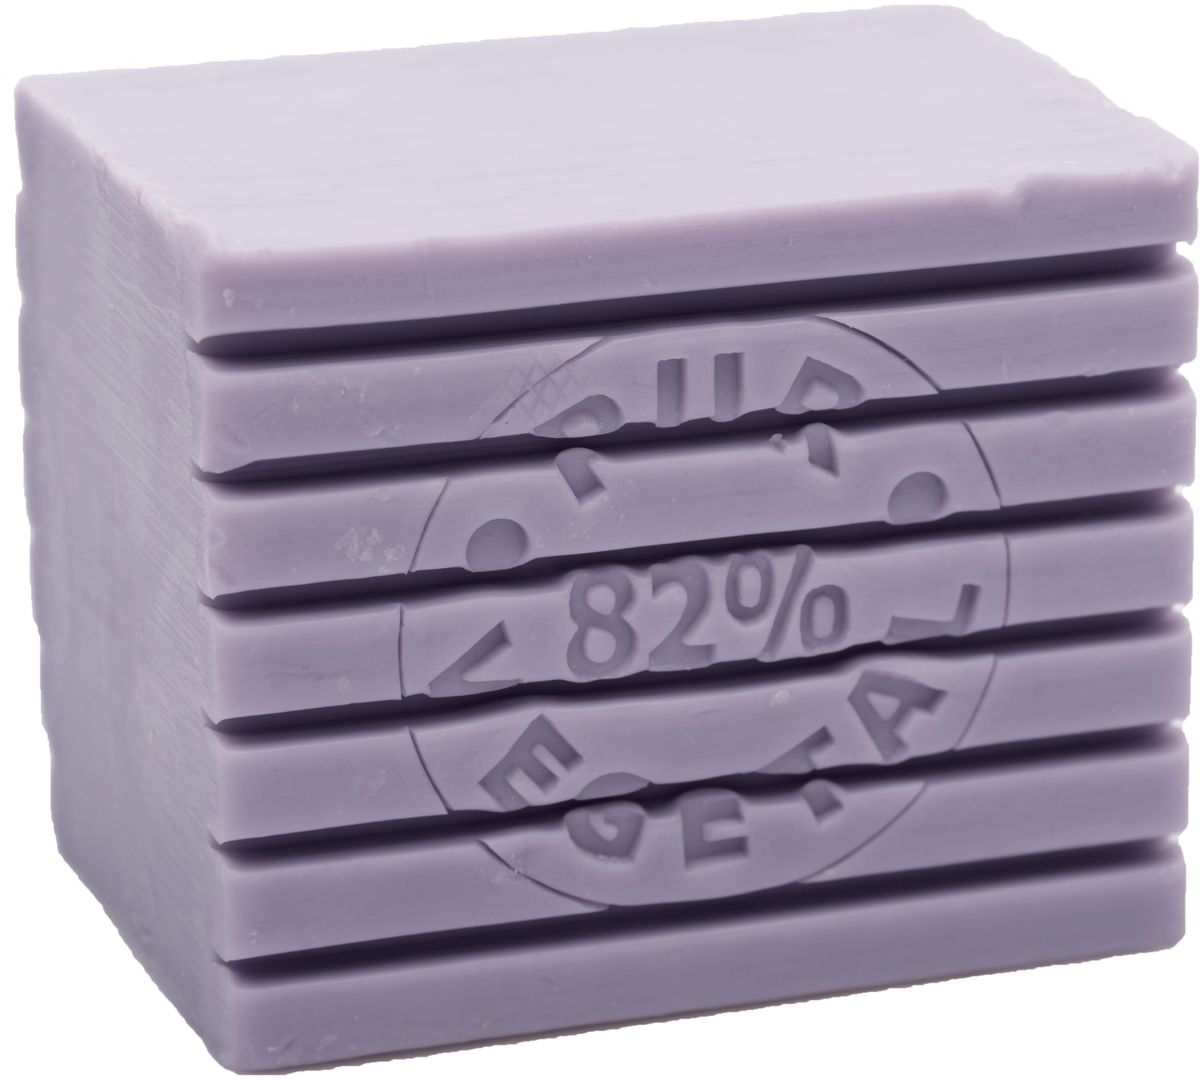 Stack of five La Savonnerie de Nyons Lavender Striped Soap bars, each embossed with various symbols and "82% extra" visible on the top bar. These bars are enriched with organic shea butter.